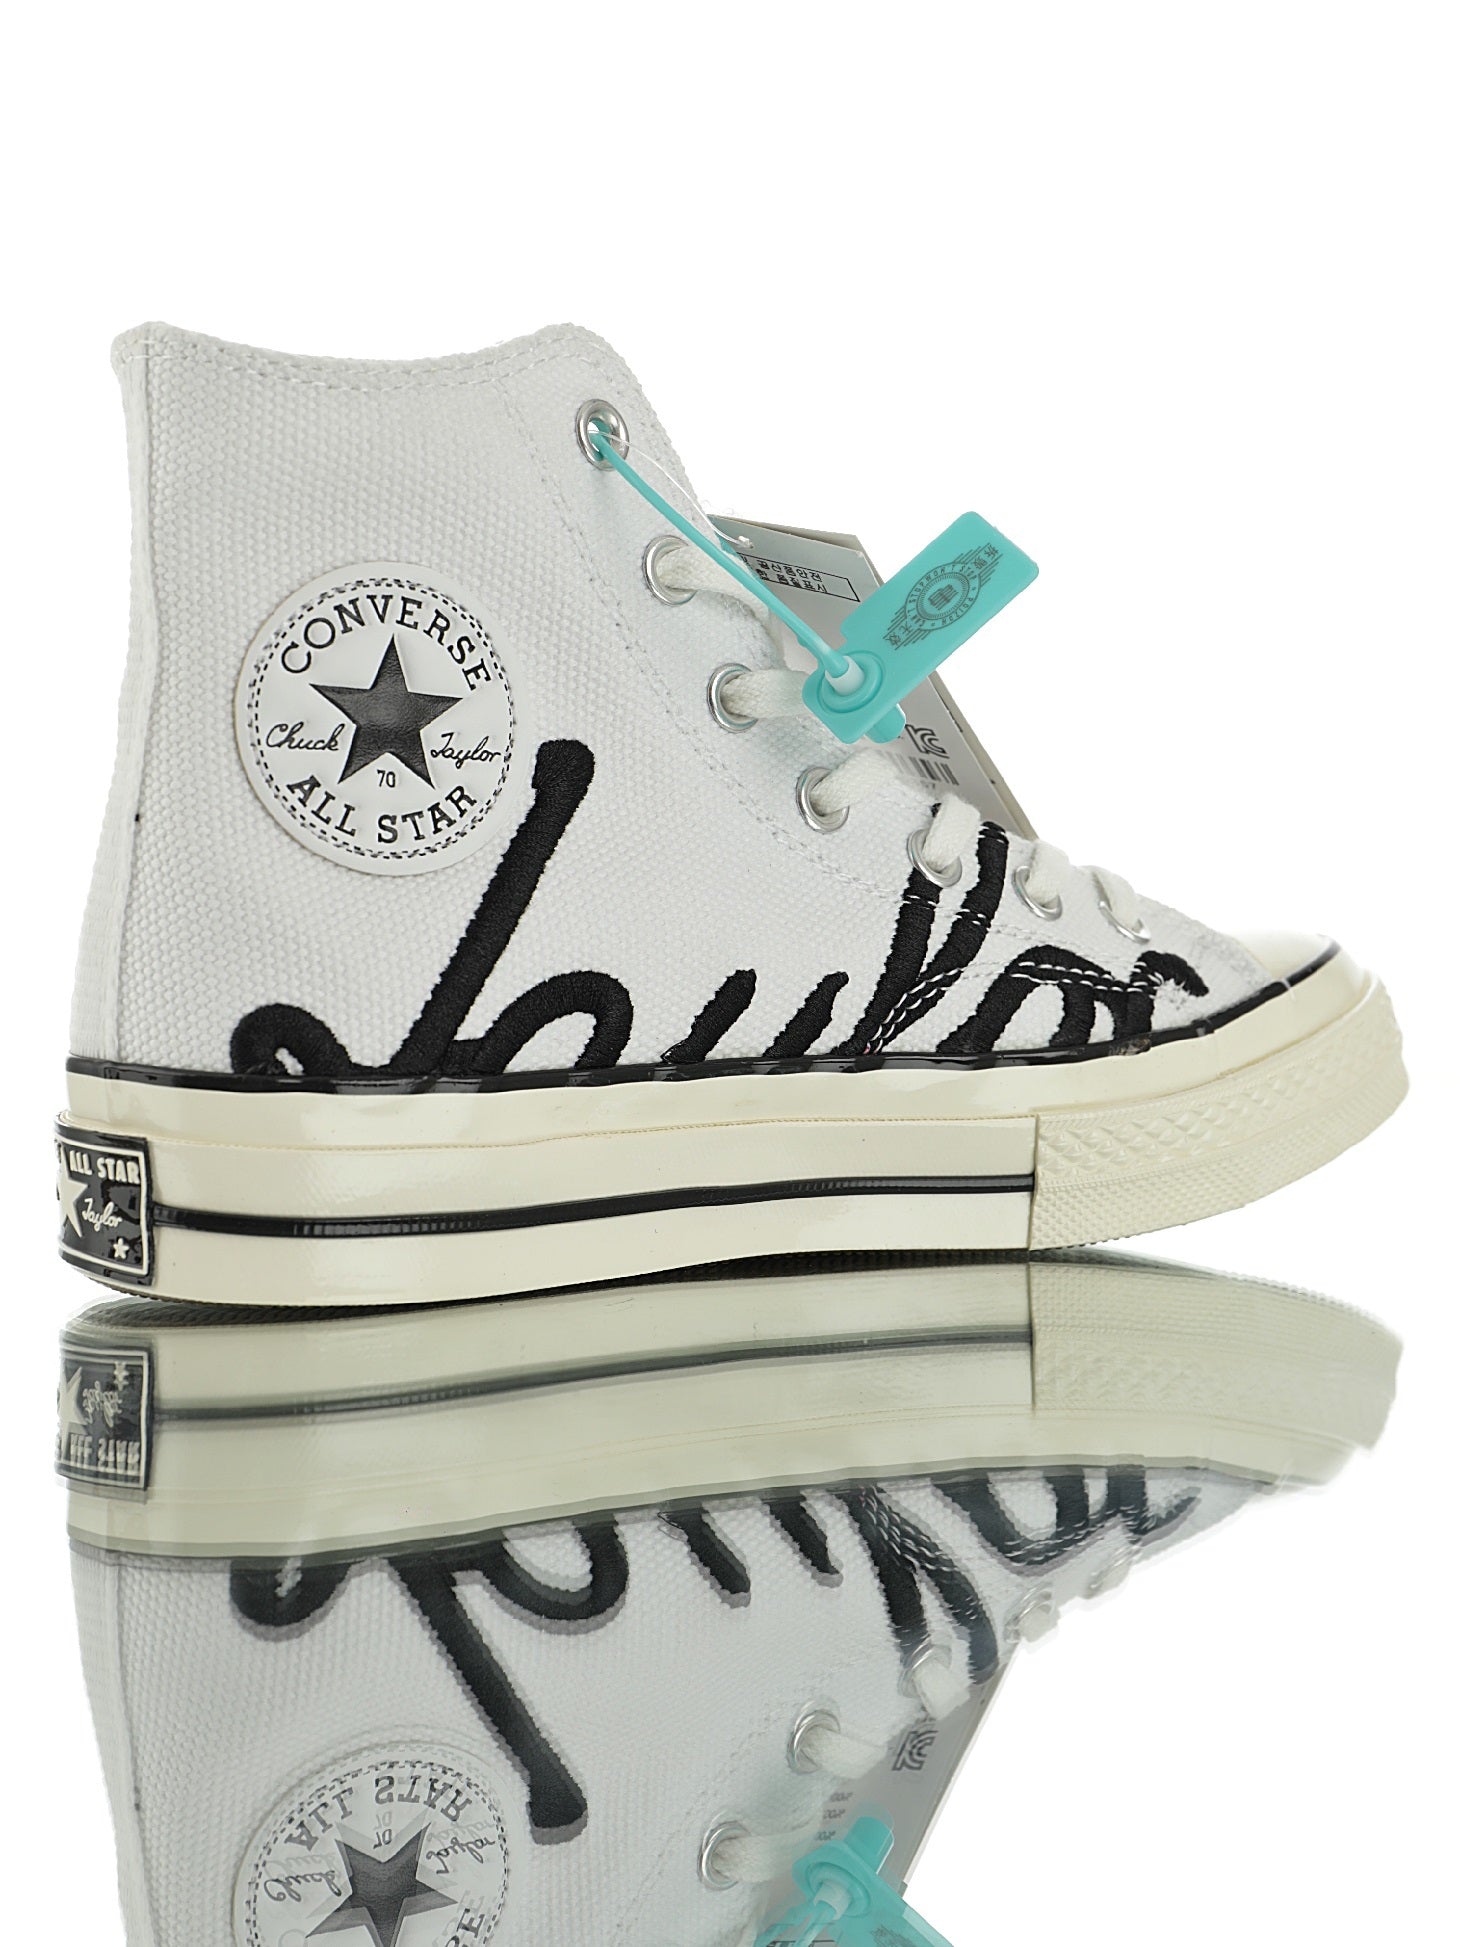 Chuck Taylor All Star 1970 HI"Embroidery" - whatever on 